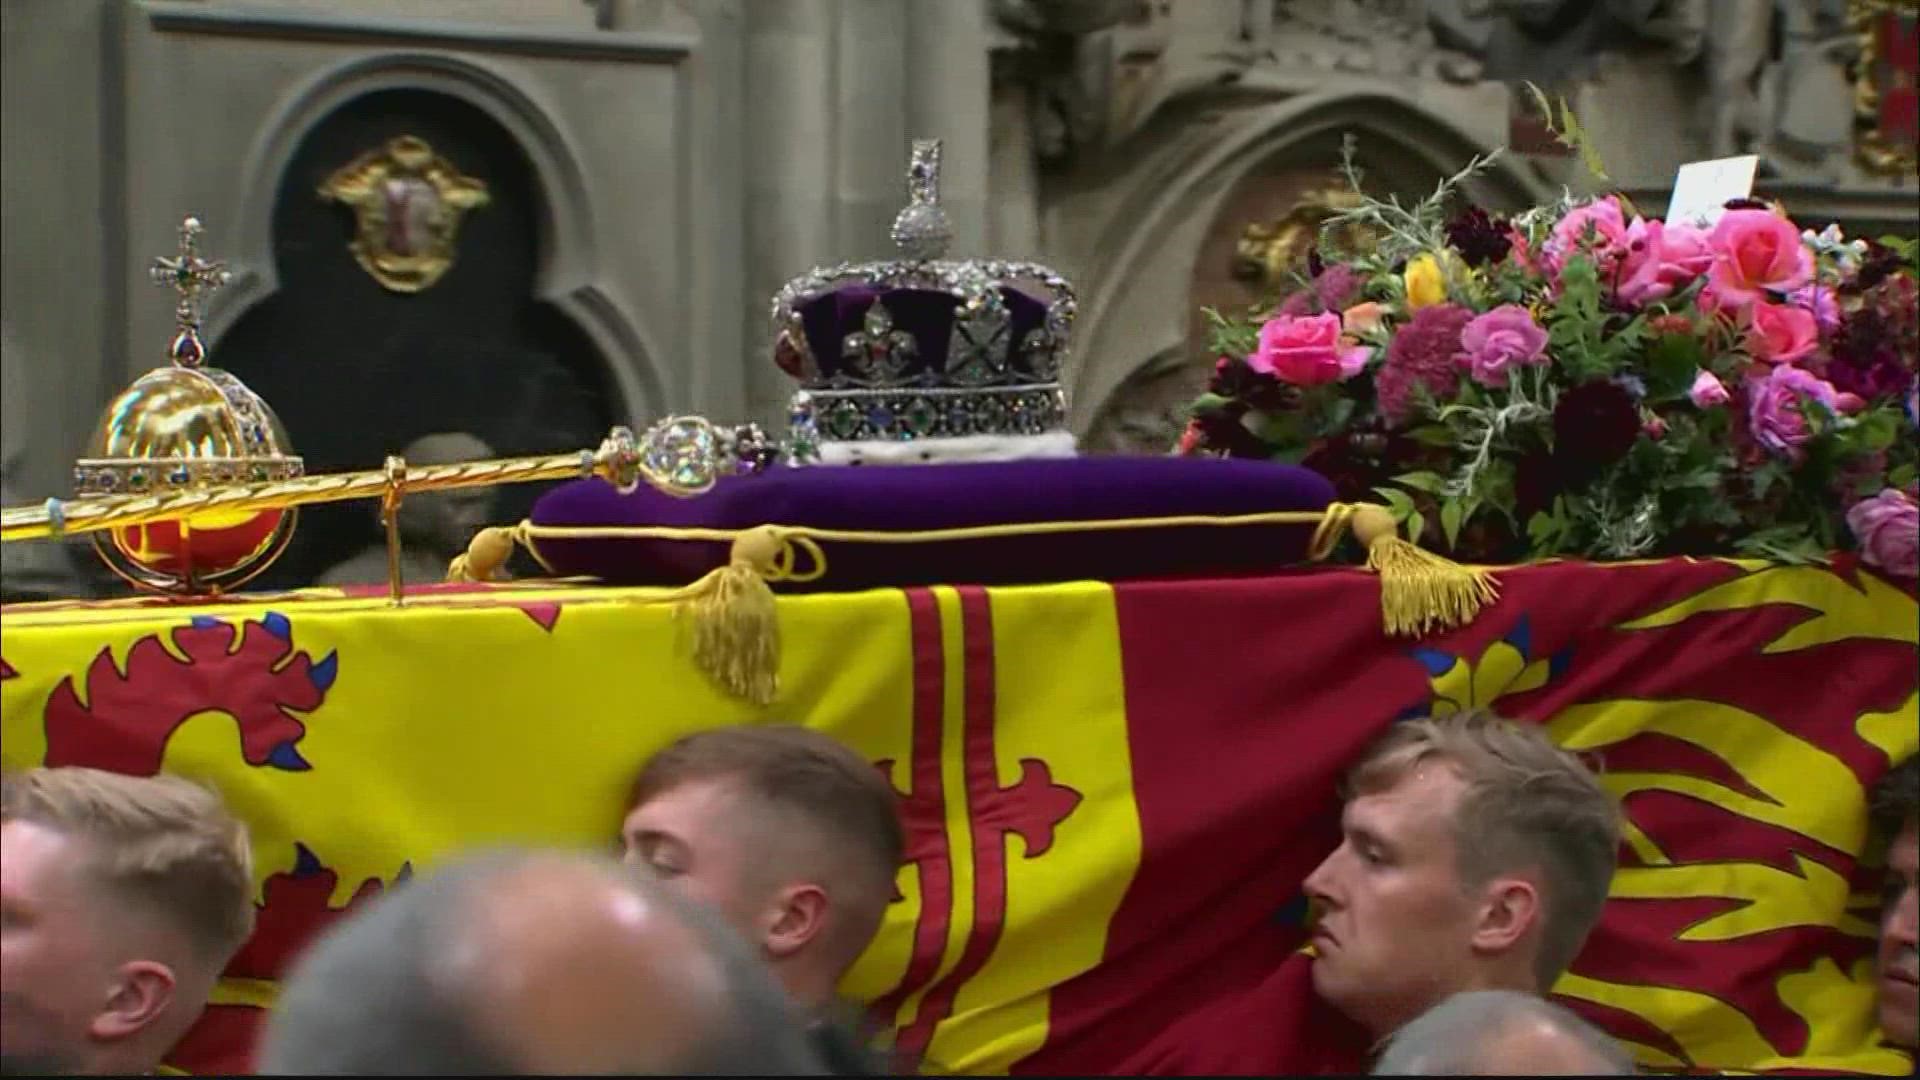 Britain said goodbye to its longest reigning monarch in a touching and historic state funeral at Westminster Abbey